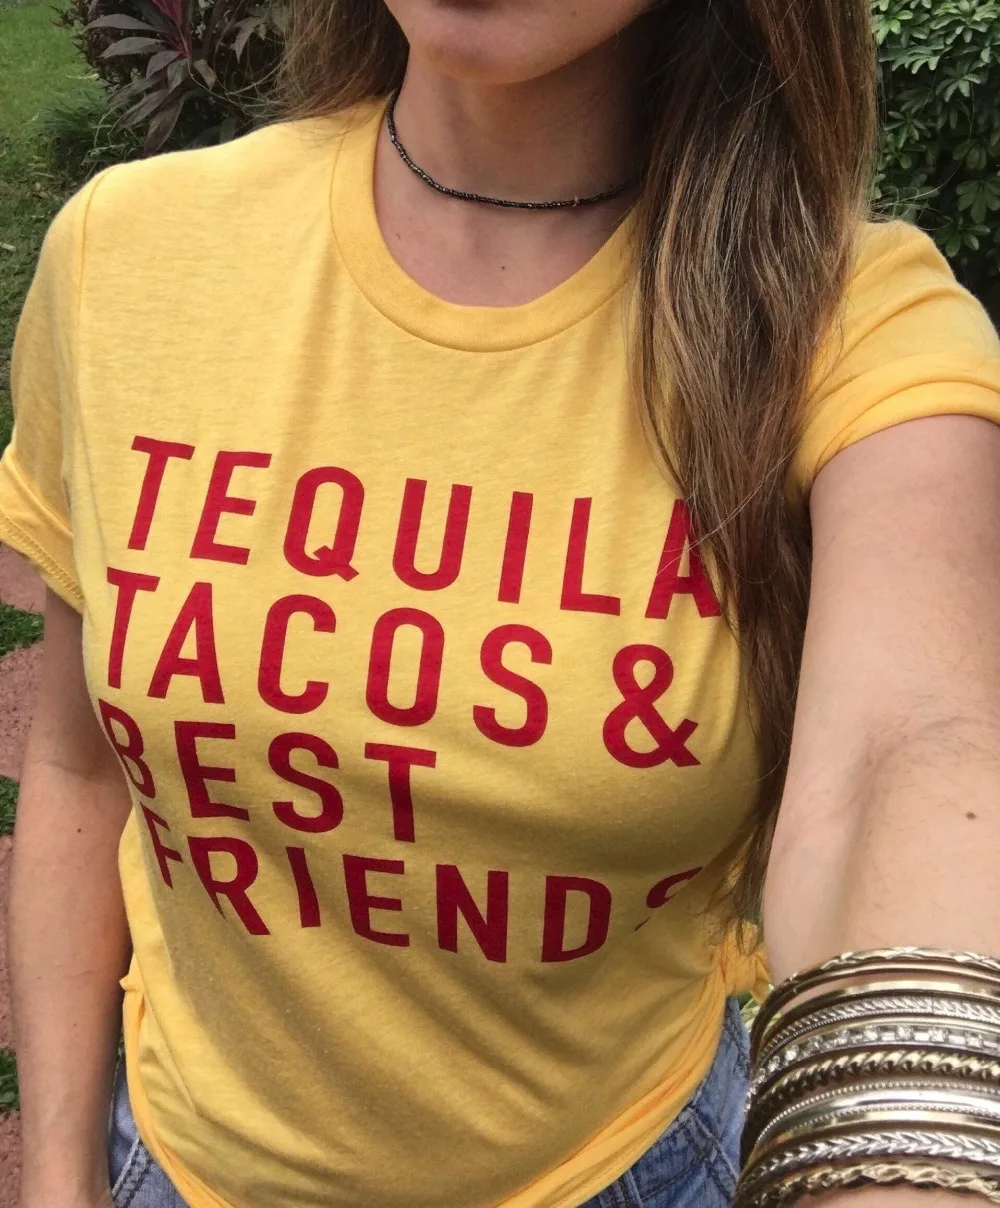 Women Unisex Tee Top Wine Lover Drinking Graphic Yellow Grunge Tees Tequila Tacos and Best Friends T Shirt Funny